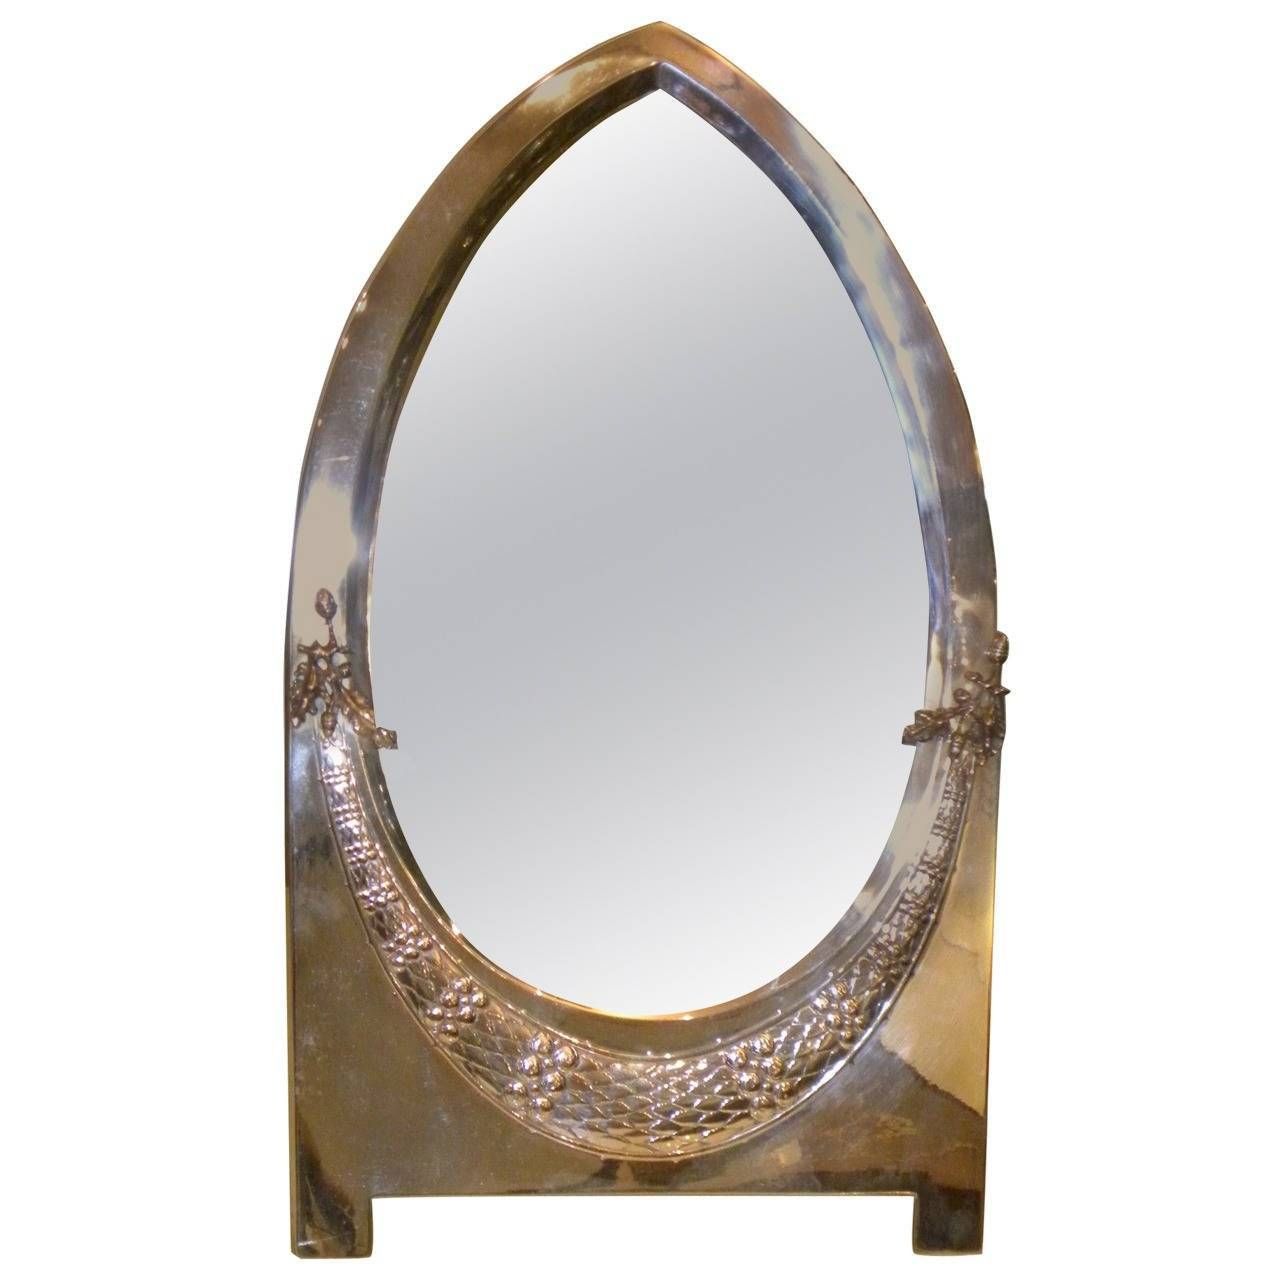 Elegant Silver Art Deco Or Art Nouveau Wmf Table Mirror For Sale Intended For Art Nouveau Dressing Table Mirrors (View 6 of 15)